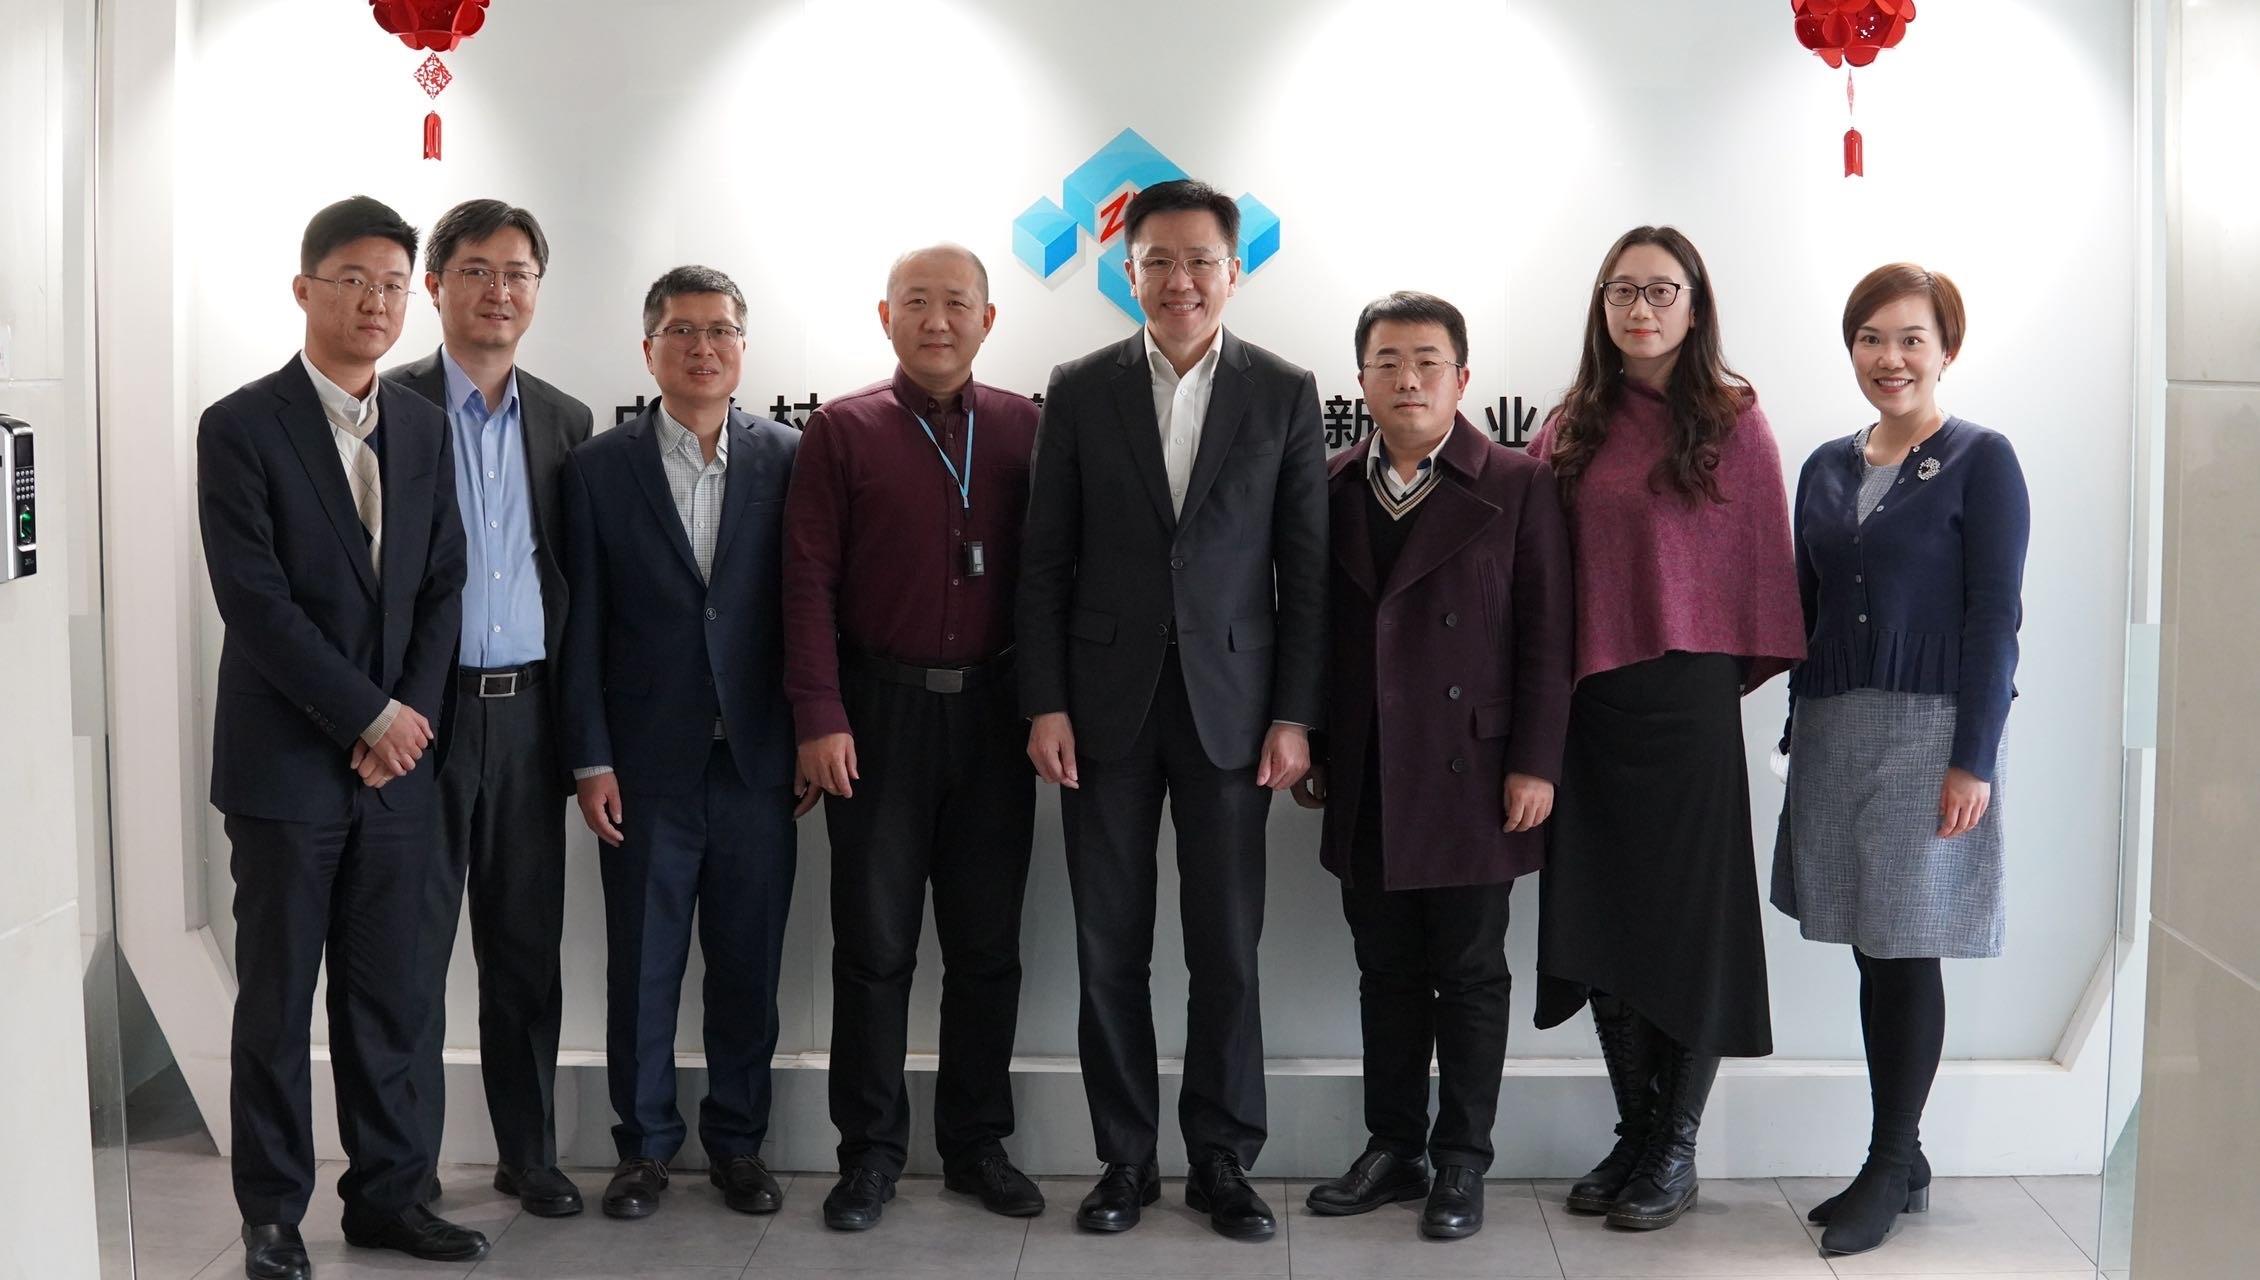 The Secretary for Innovation, Technology and Industry, Professor Sun Dong (fourth right), visits the Zhongguancun Beijing-Hong Kong-Macao Youth Innovation Center in Beijing today (January 17) and is pictured with the Center's staff and representatives of enterprises.